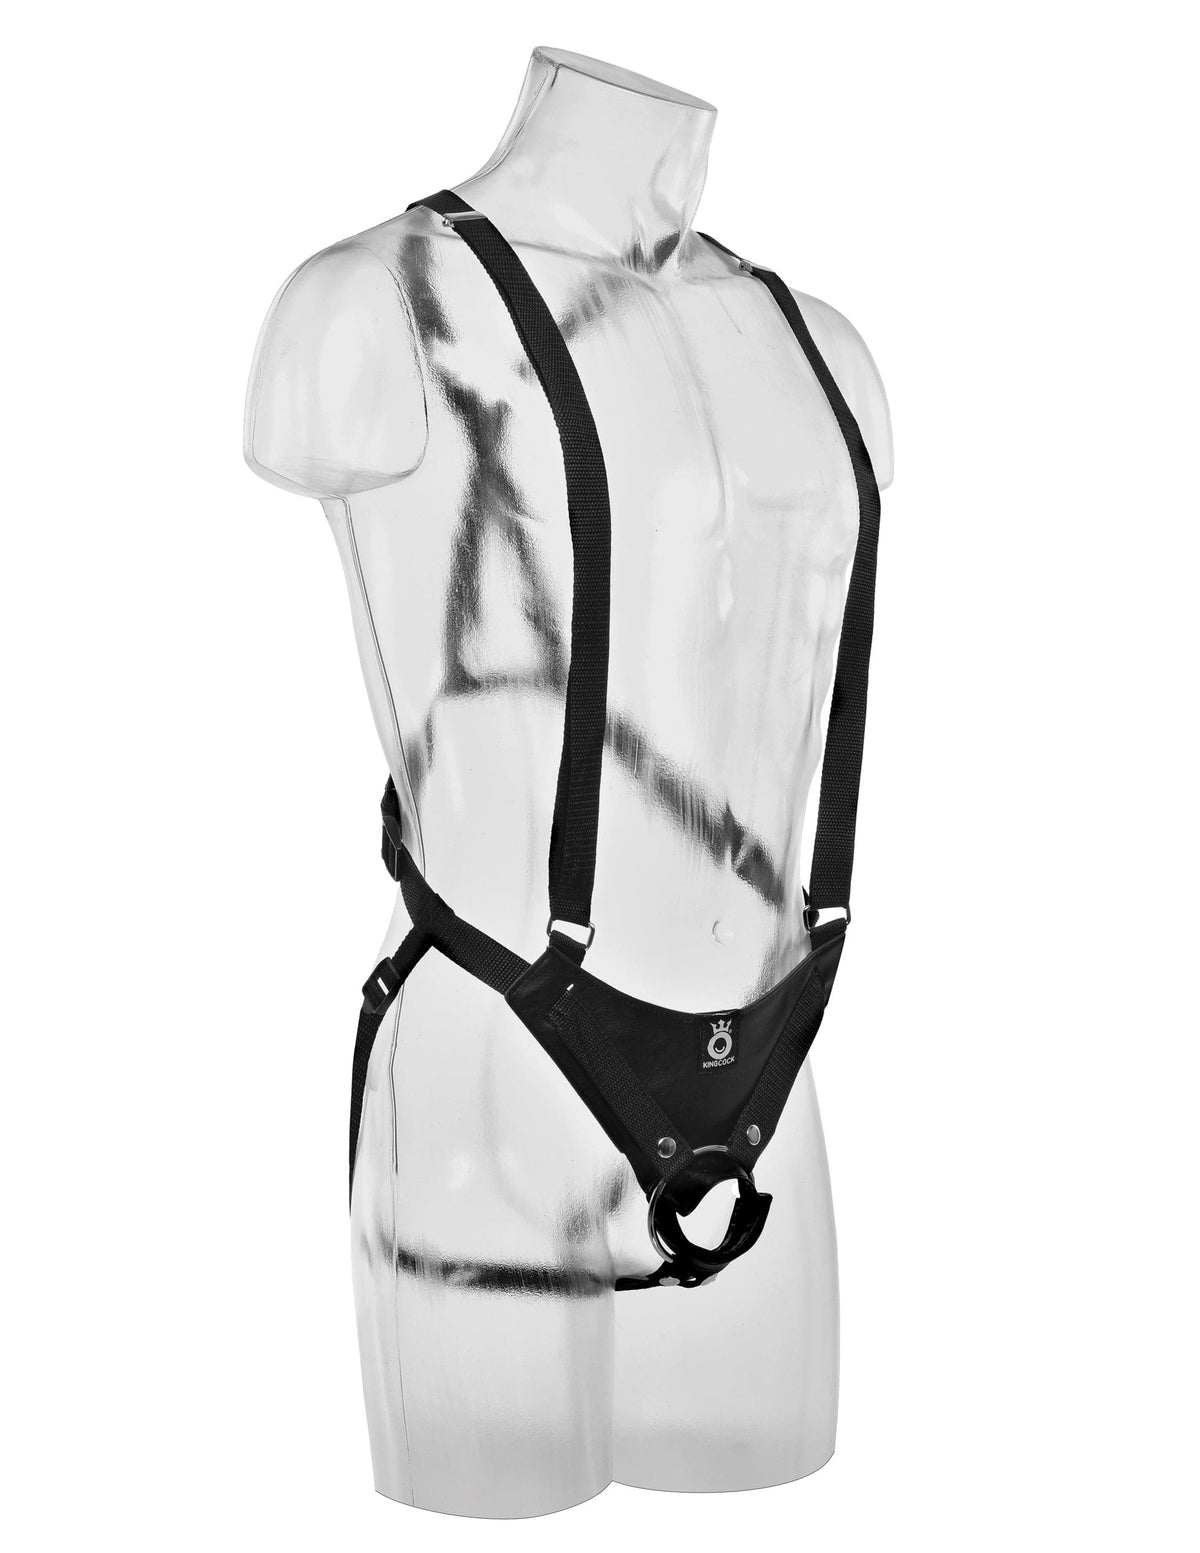 king cock 11 inch hollow strap on suspender system flesh